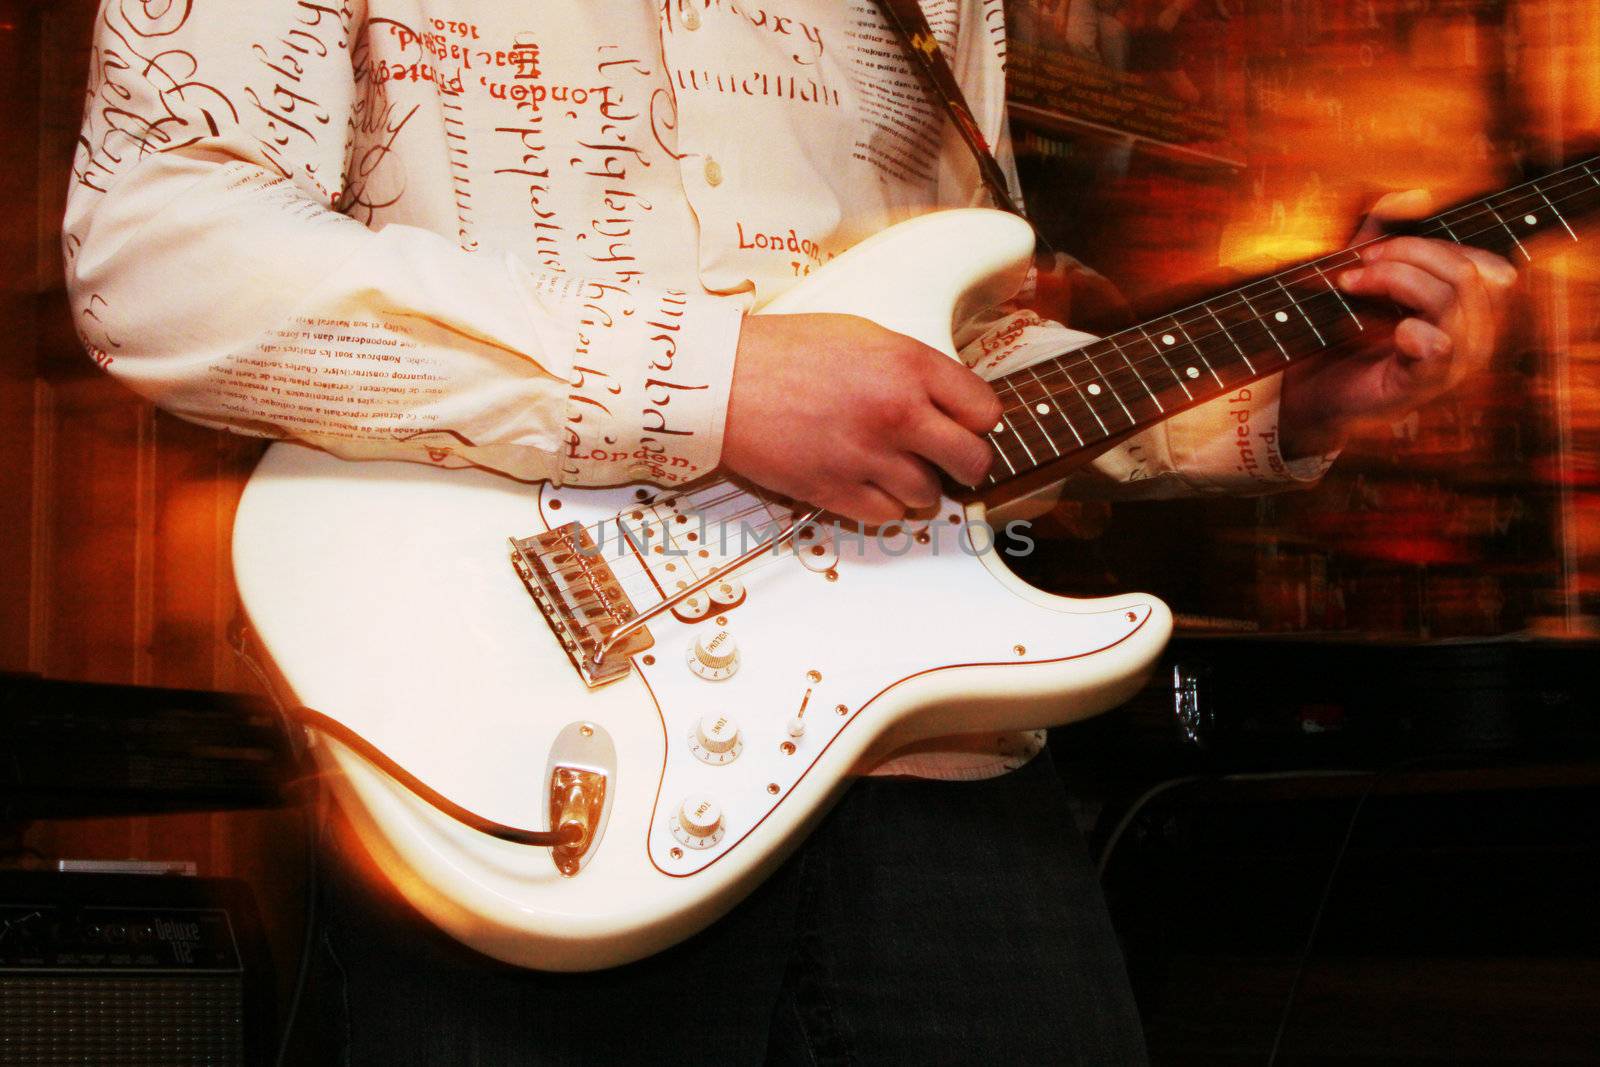 The guitarist in a white shirt plays on a white guitar